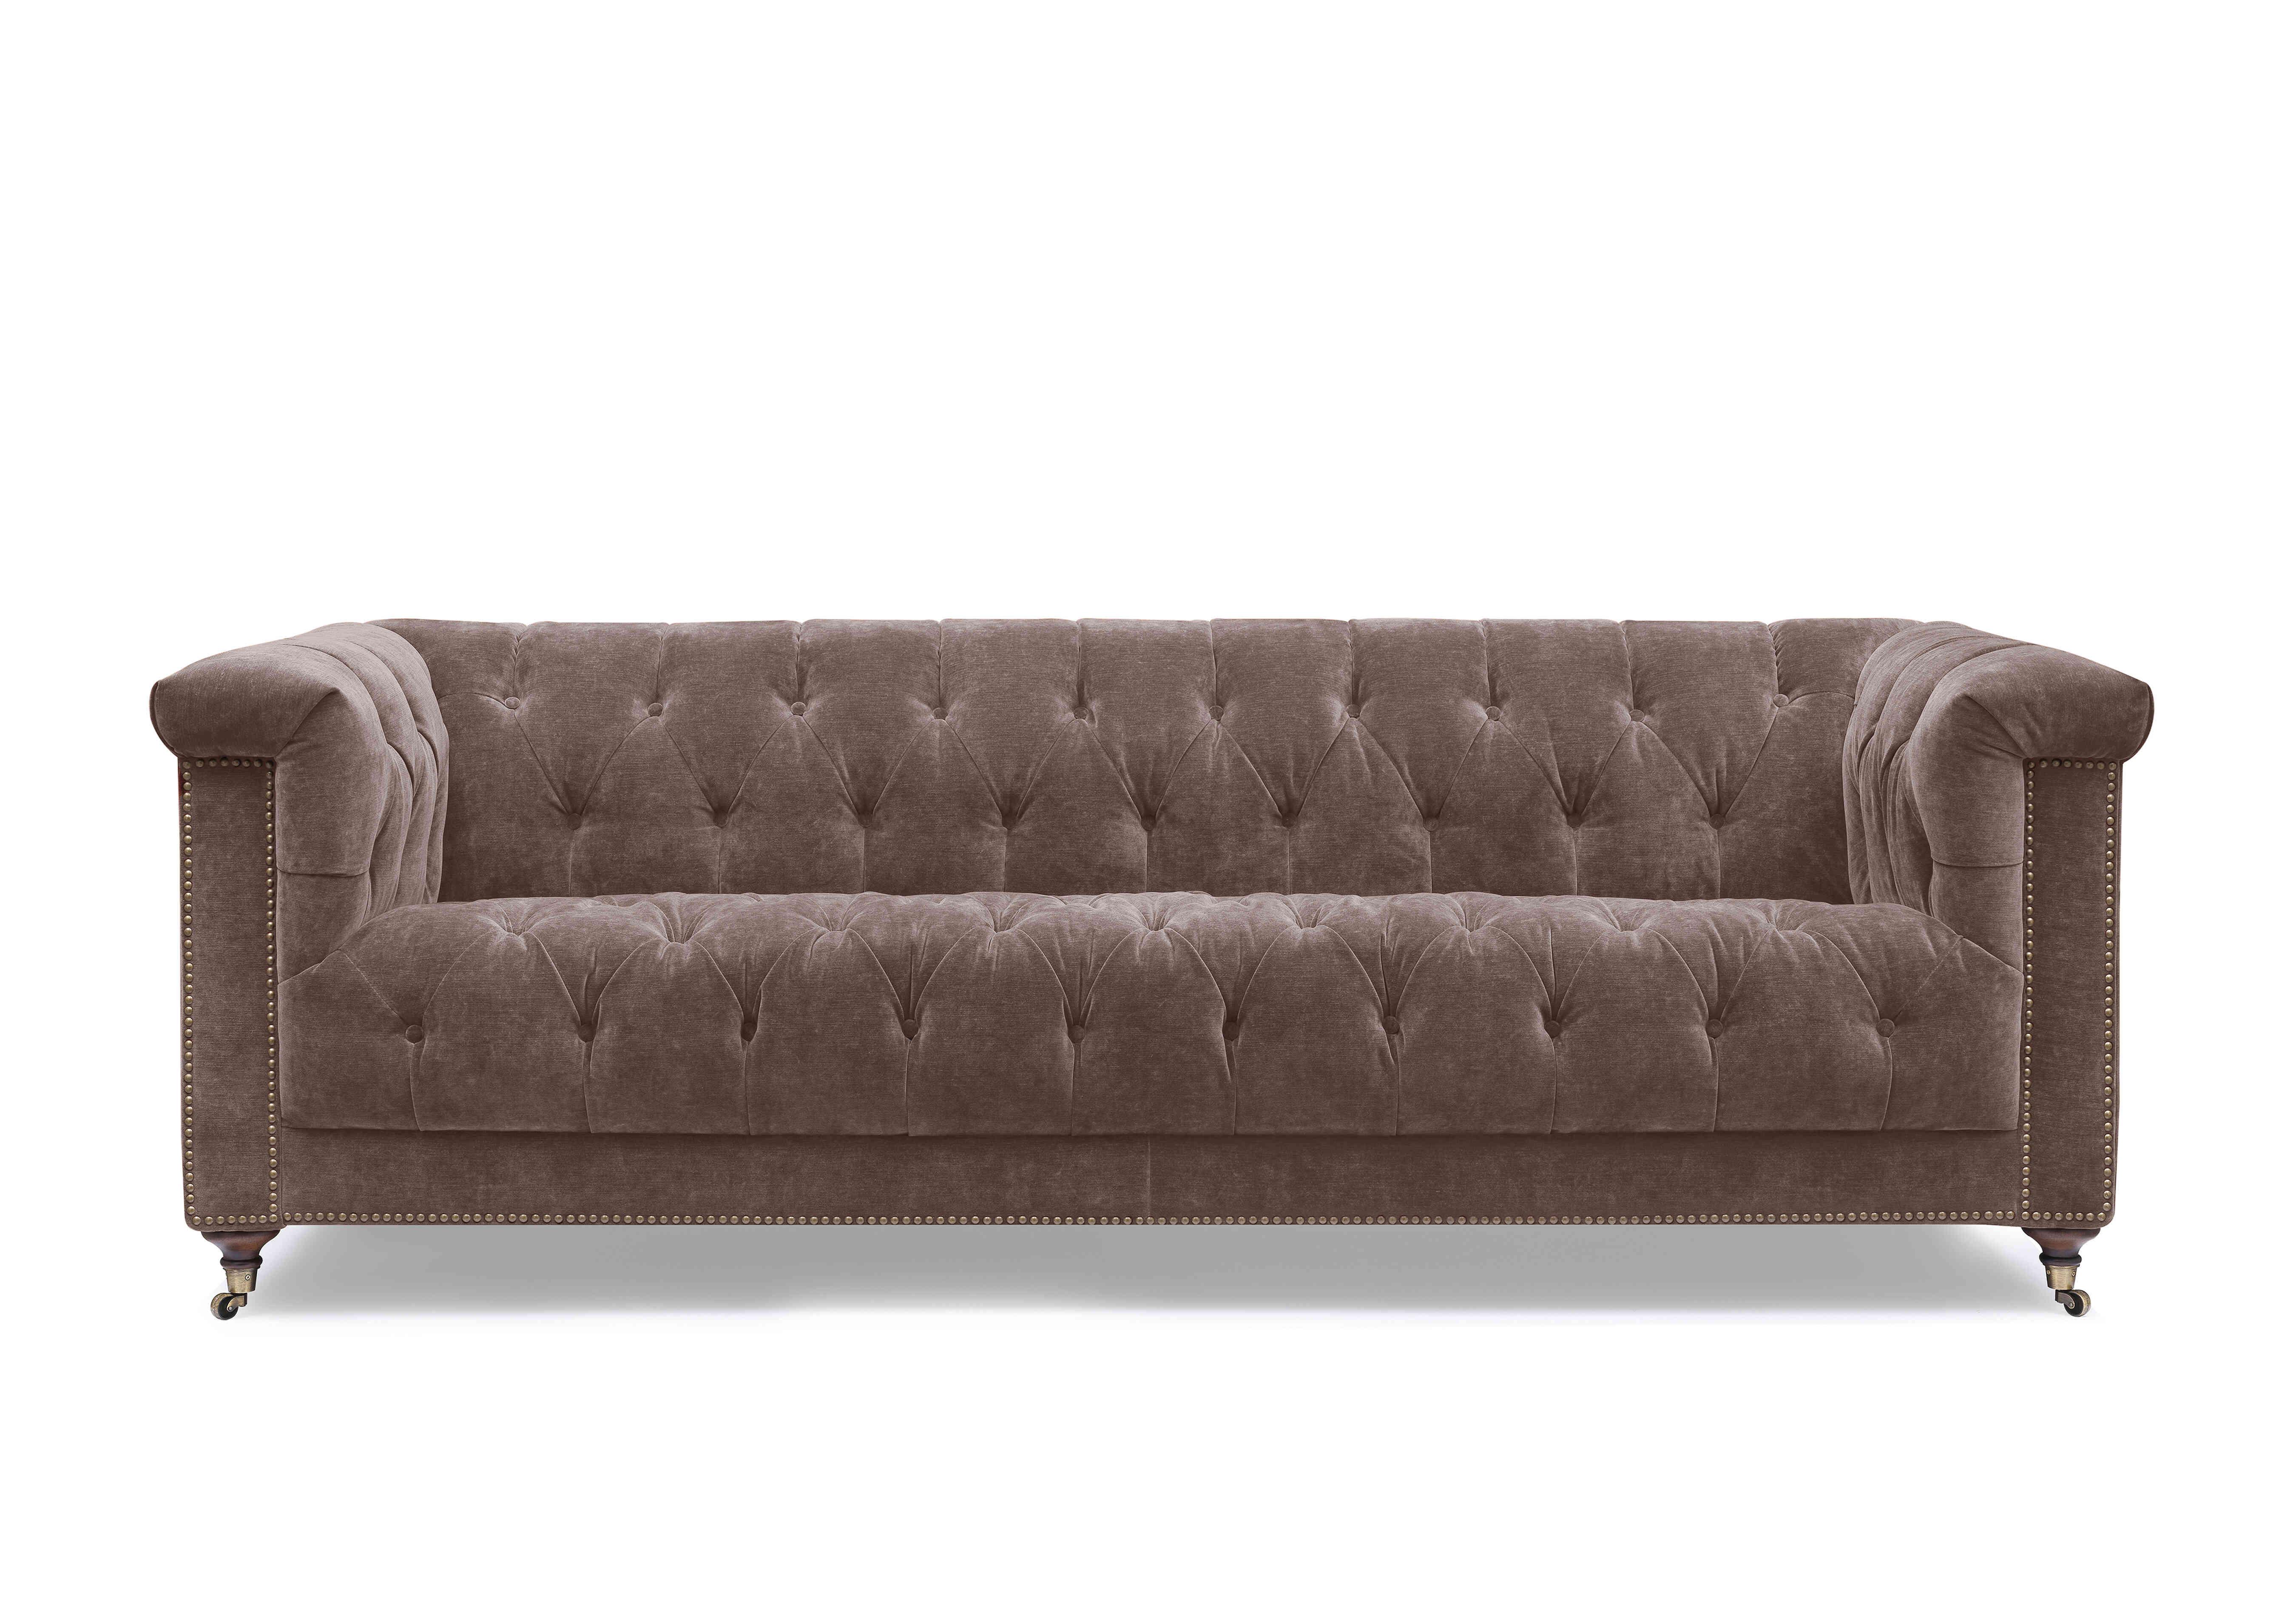 Wallace 4 Seater Fabric Chesterfield Sofa in X3y1-W023 Antler on Furniture Village